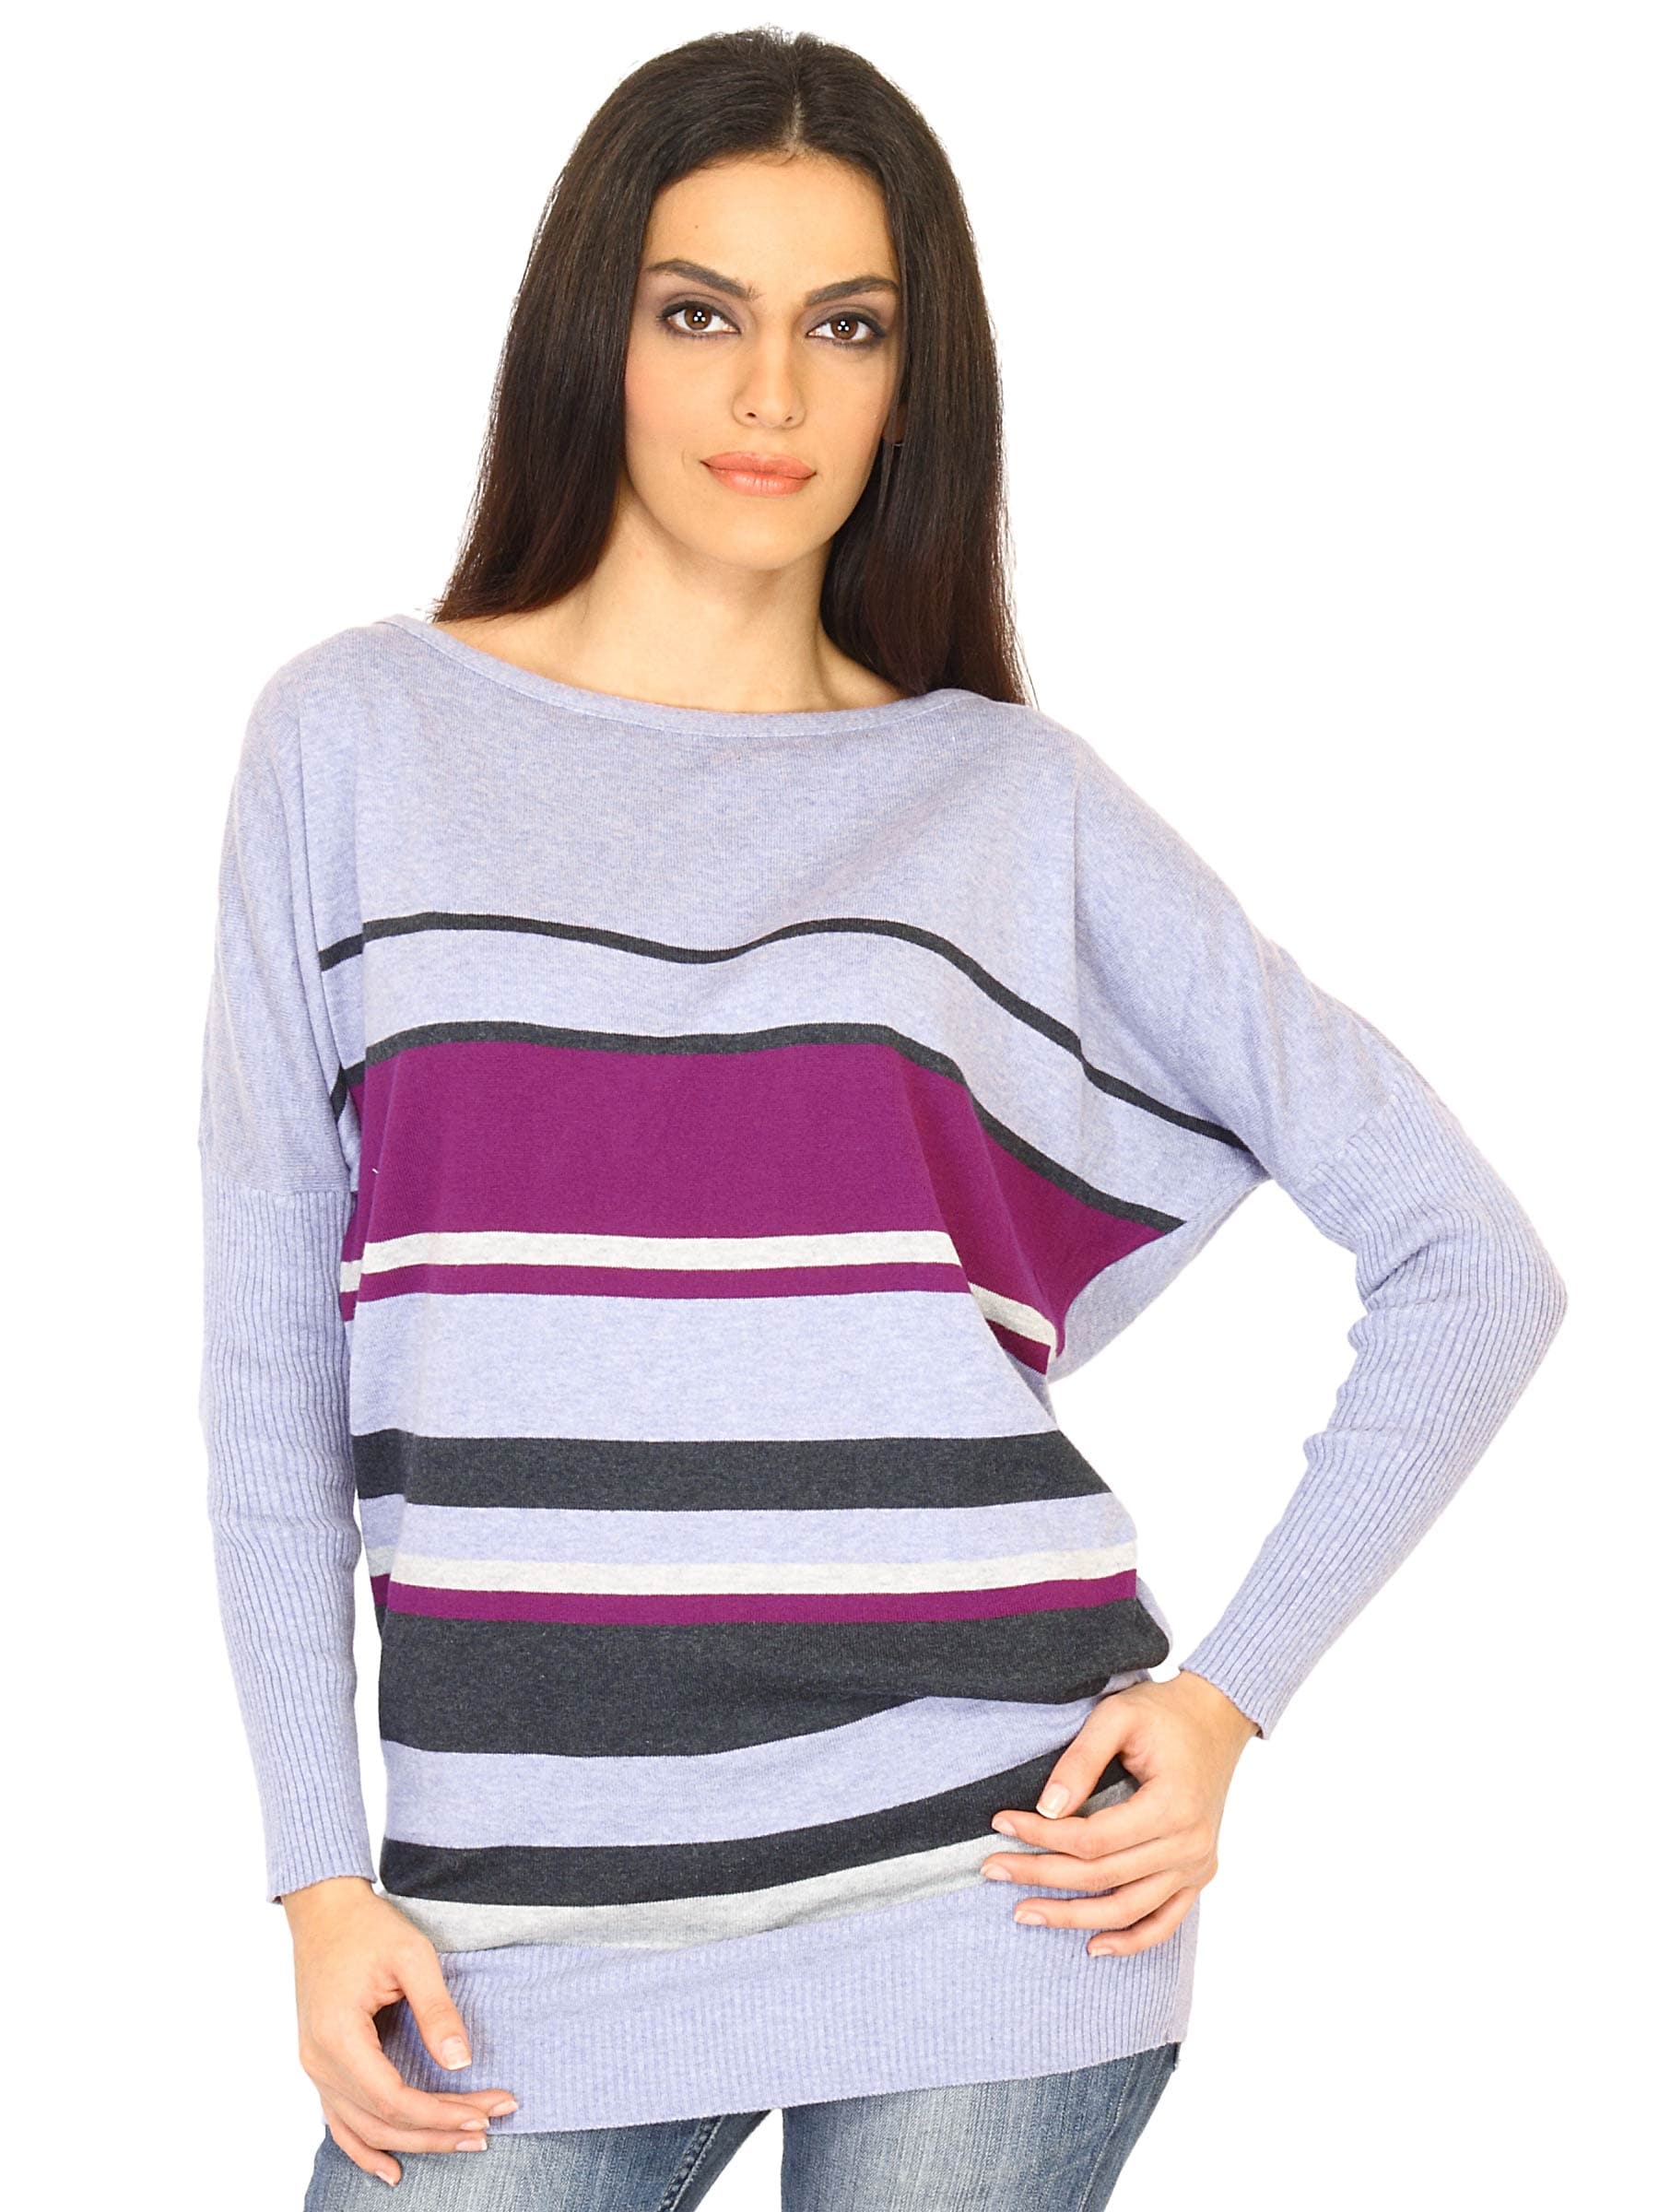 United Colors of Benetton Women Striped Magenta Top